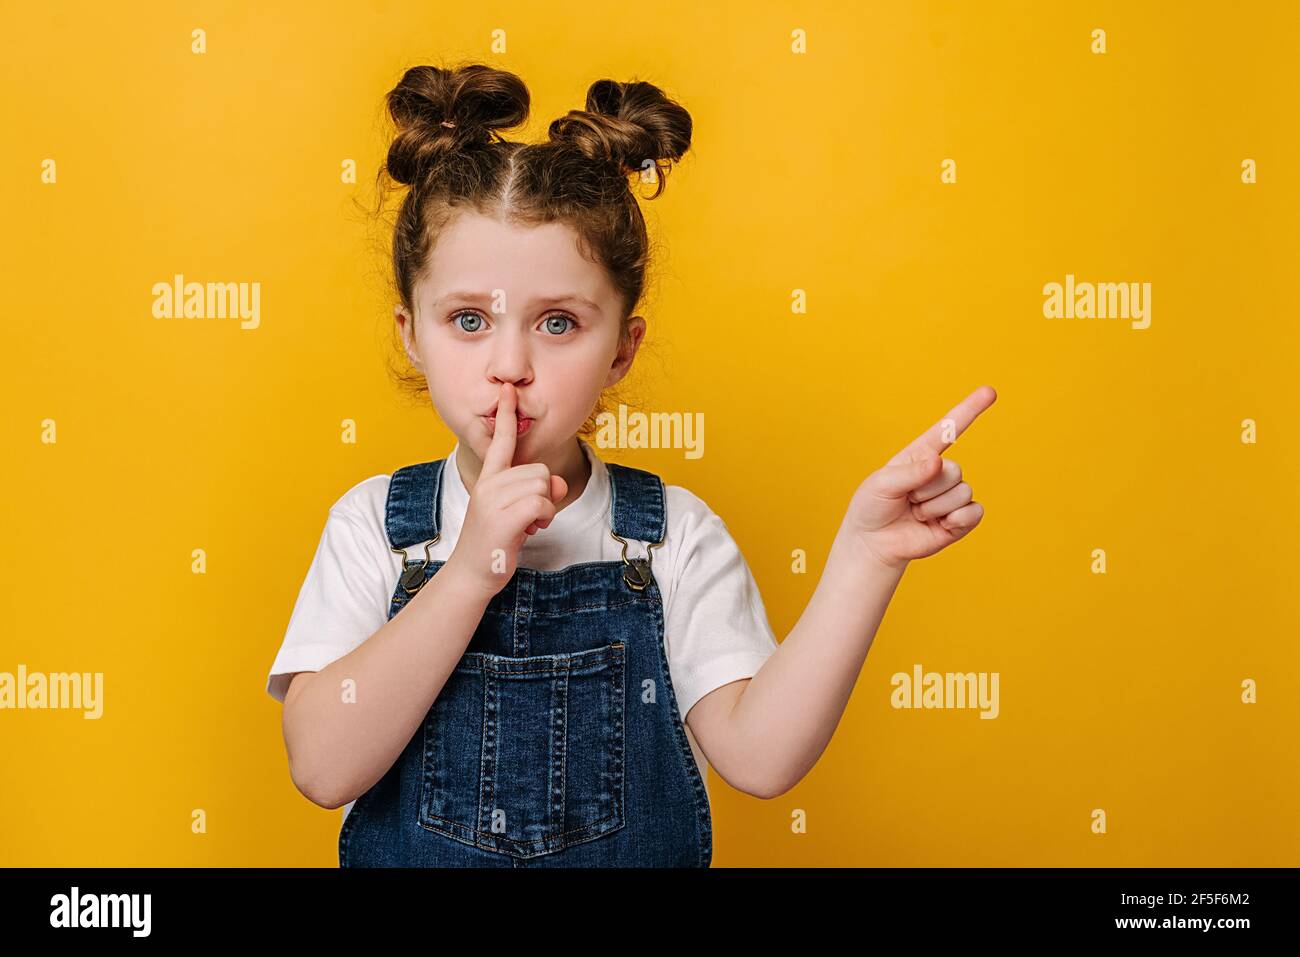 Adorable little girl holding finger on lips symbol of hush gesture of asking to be quiet, isolated over yellow studio background with copy free space Stock Photo